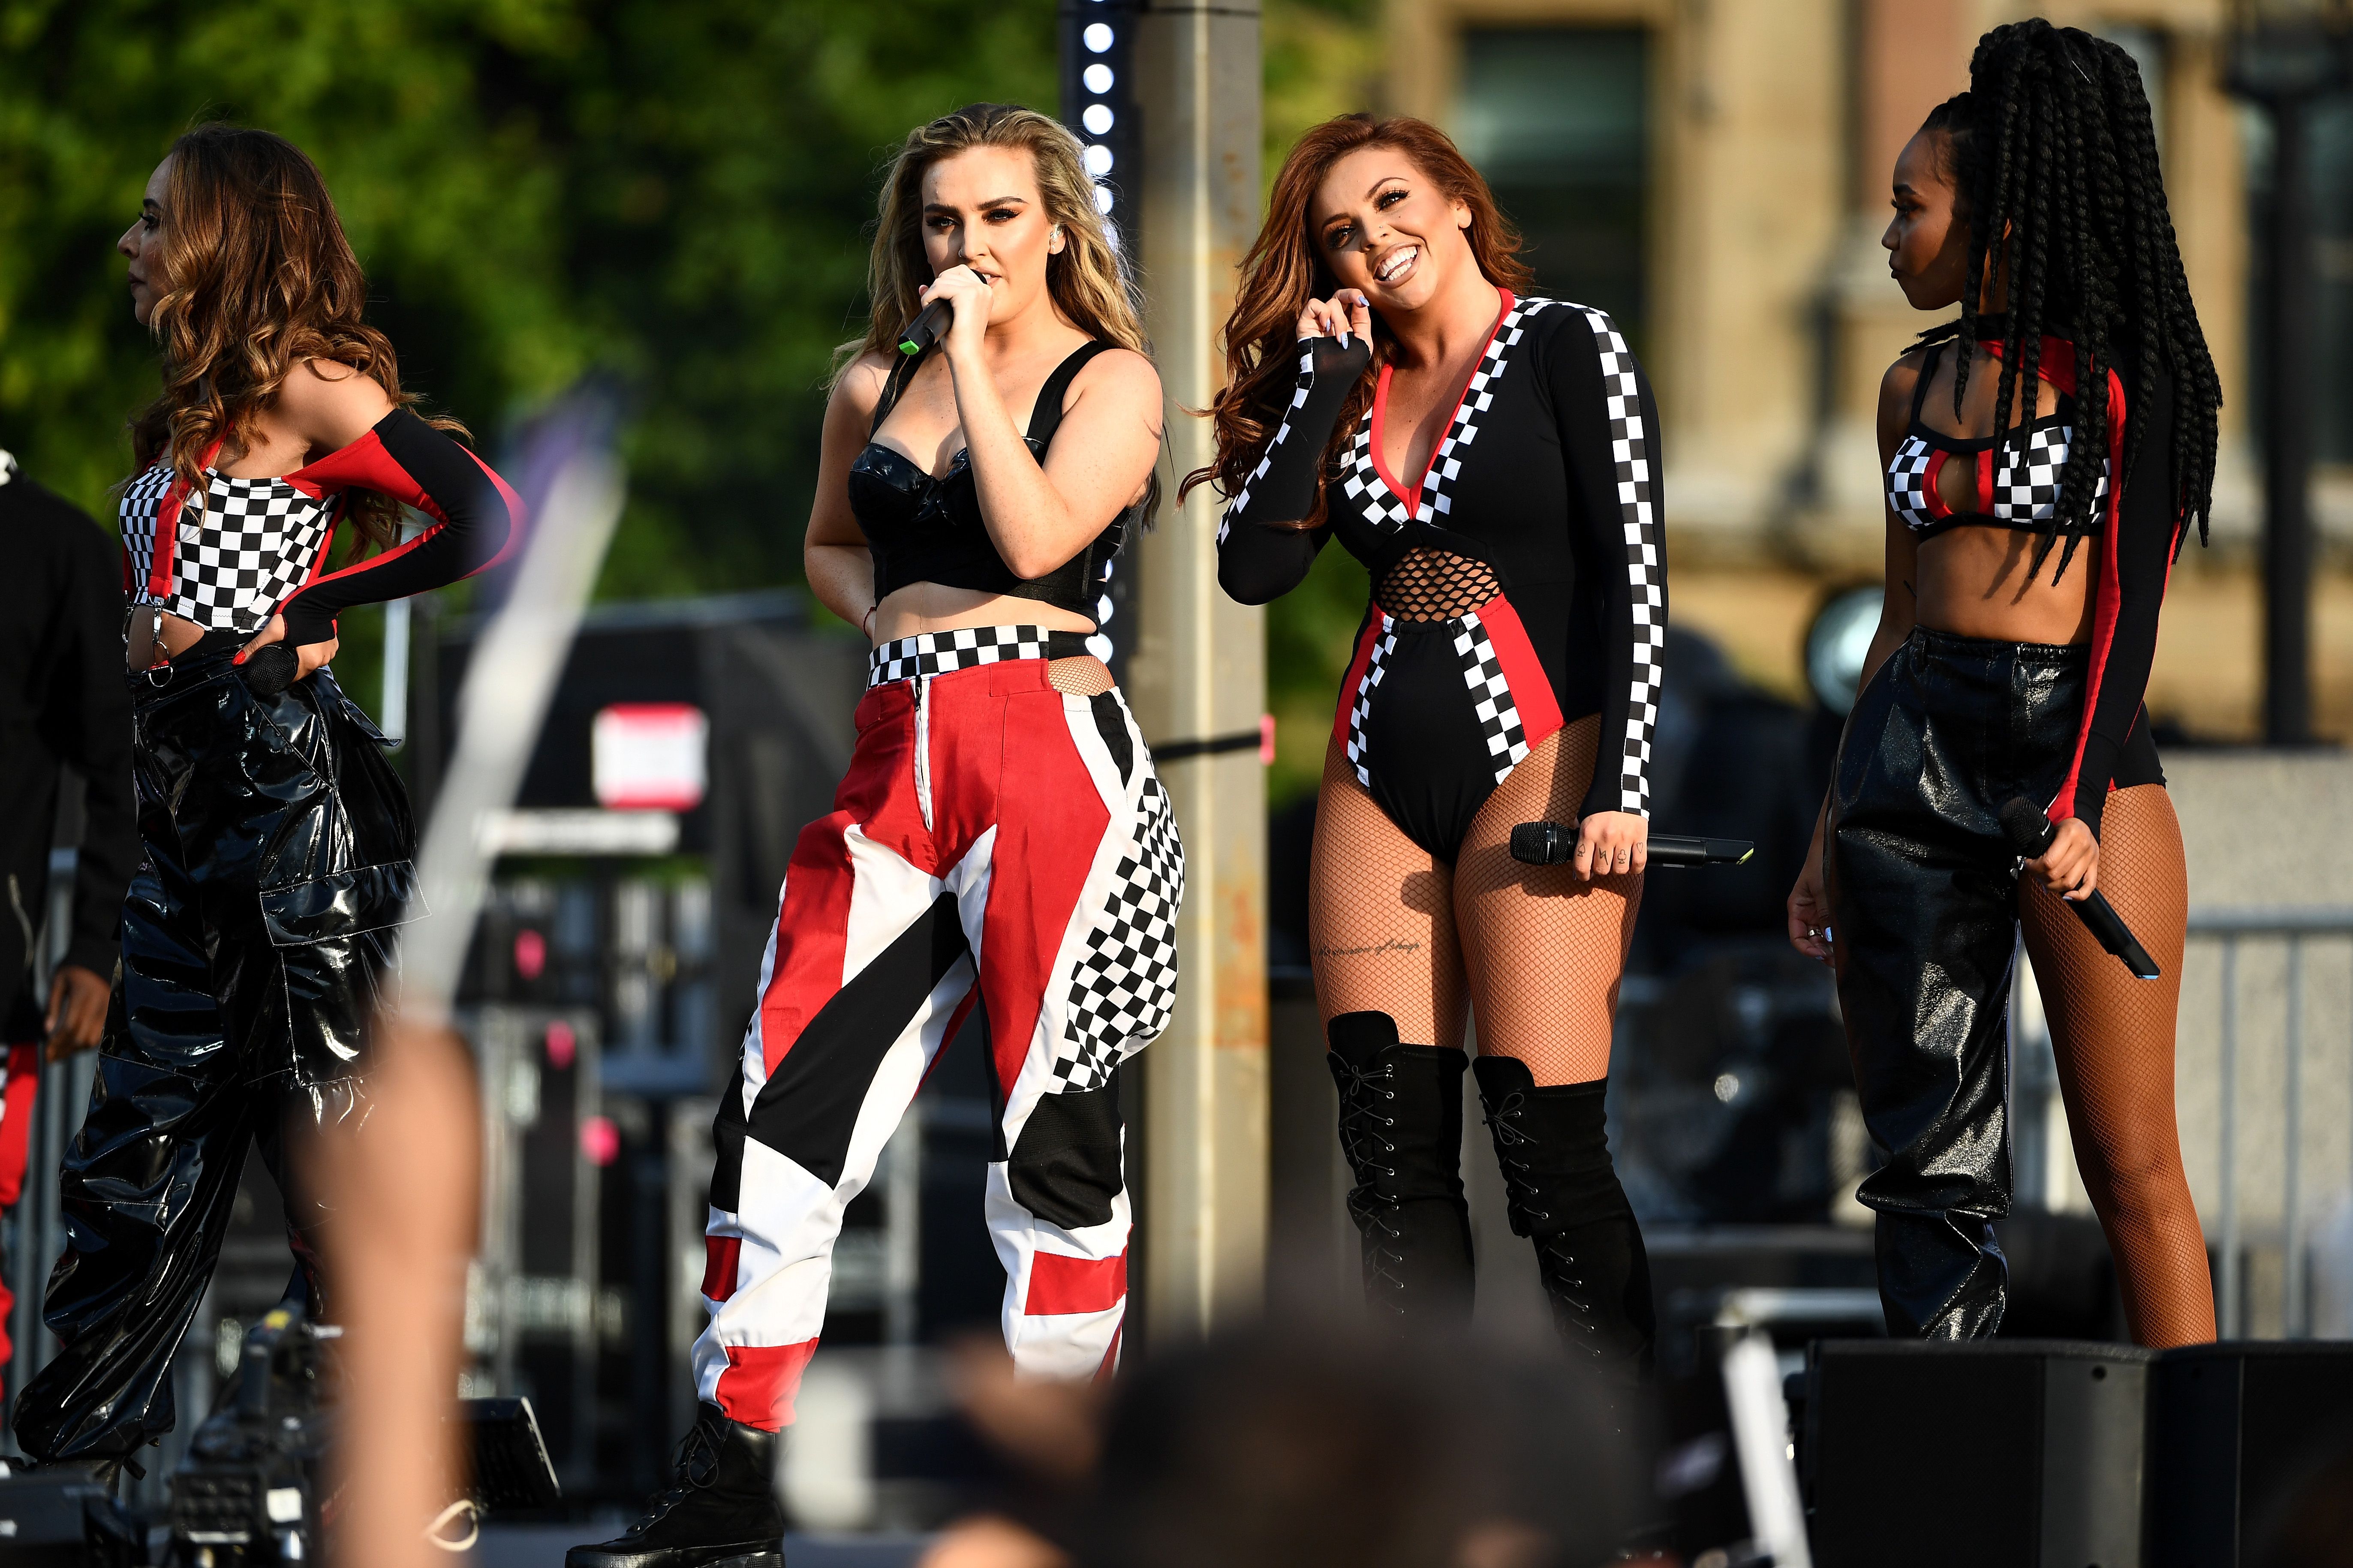 Did Perrie Edwards Change This Little Mix Lyric To Make A Subtle Dig At Gigi Hadid